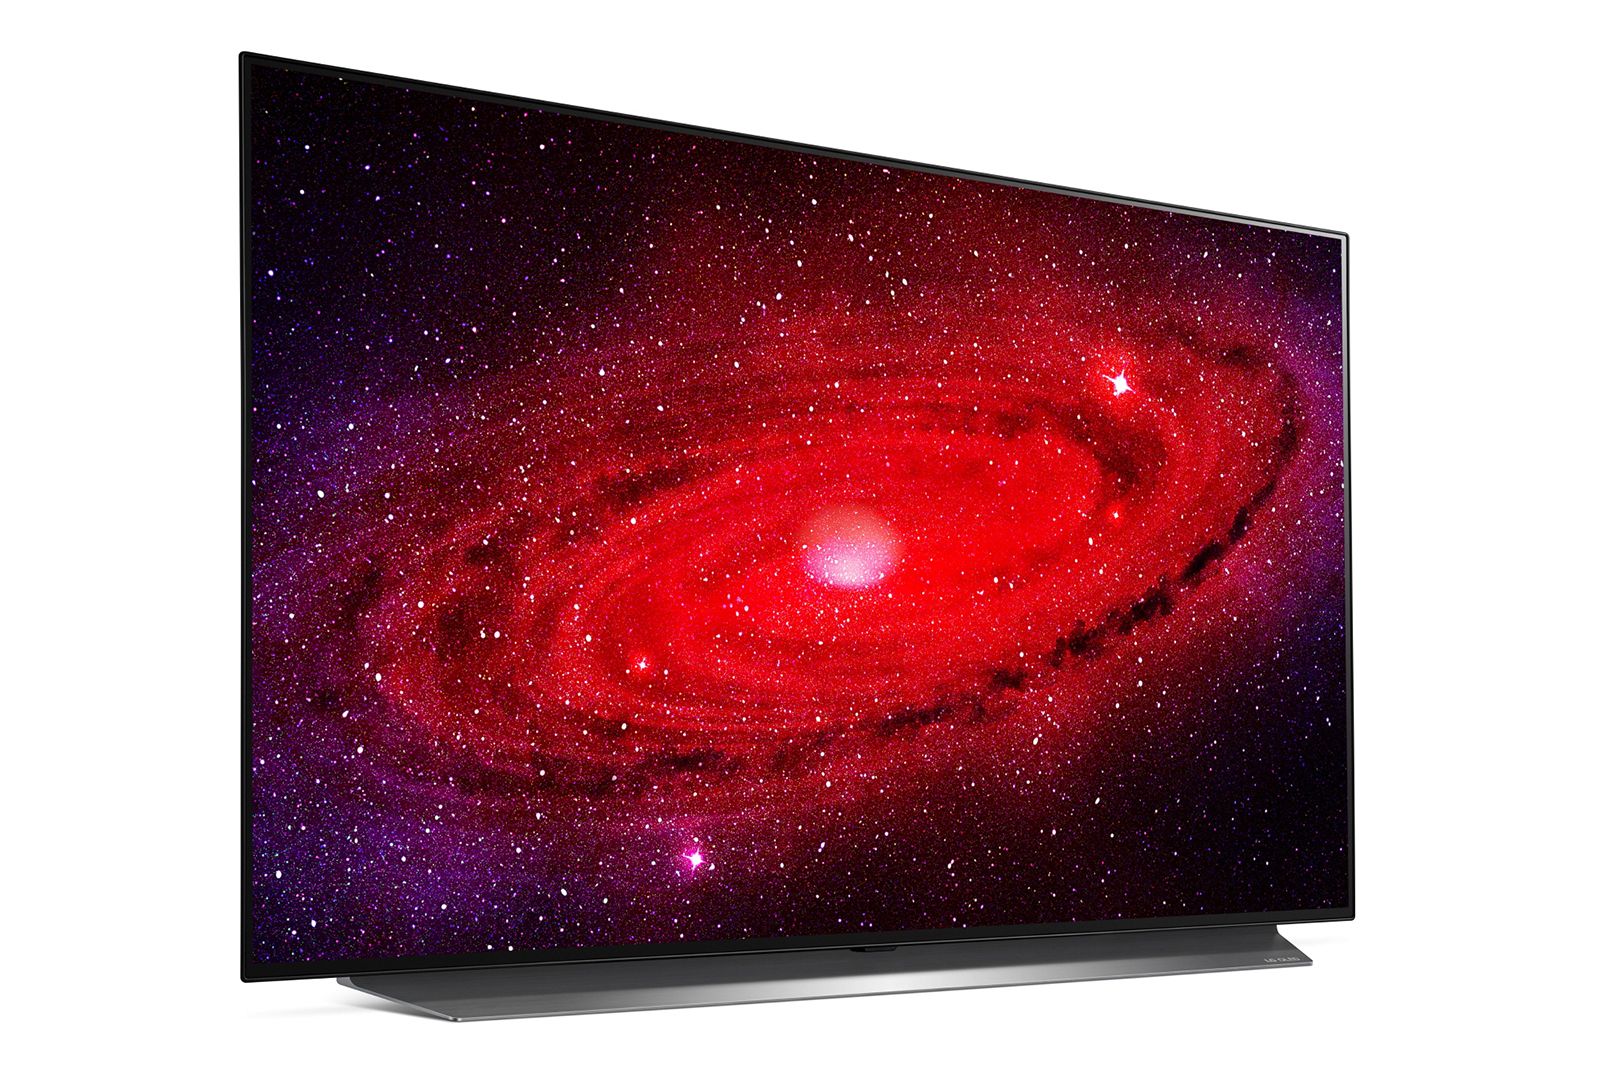 LGs first 48-inch OLED TV to be available from June 48CX also ideal for gaming image 1